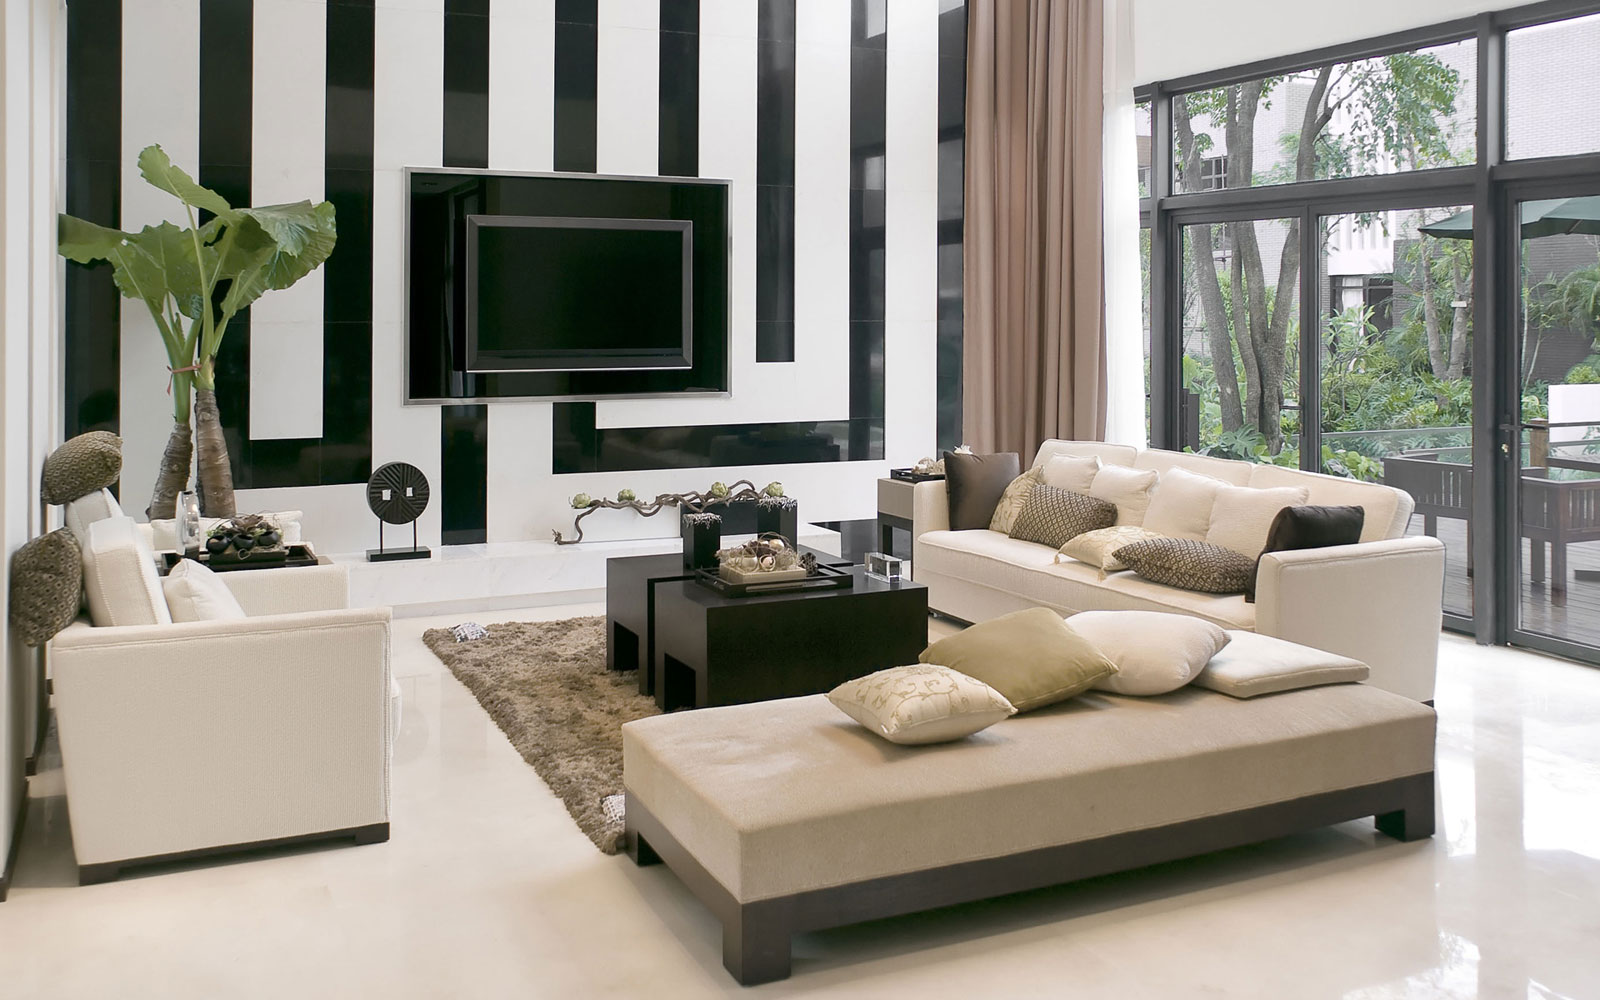 Modern Living With Breathtaking Modern Living Room Design With Sofa And Bench Completed By Cushions Furnished With Chair And Black Table On Thick Rug Also Added With Wall Television Living Room Stylish And Simply Living Room Design